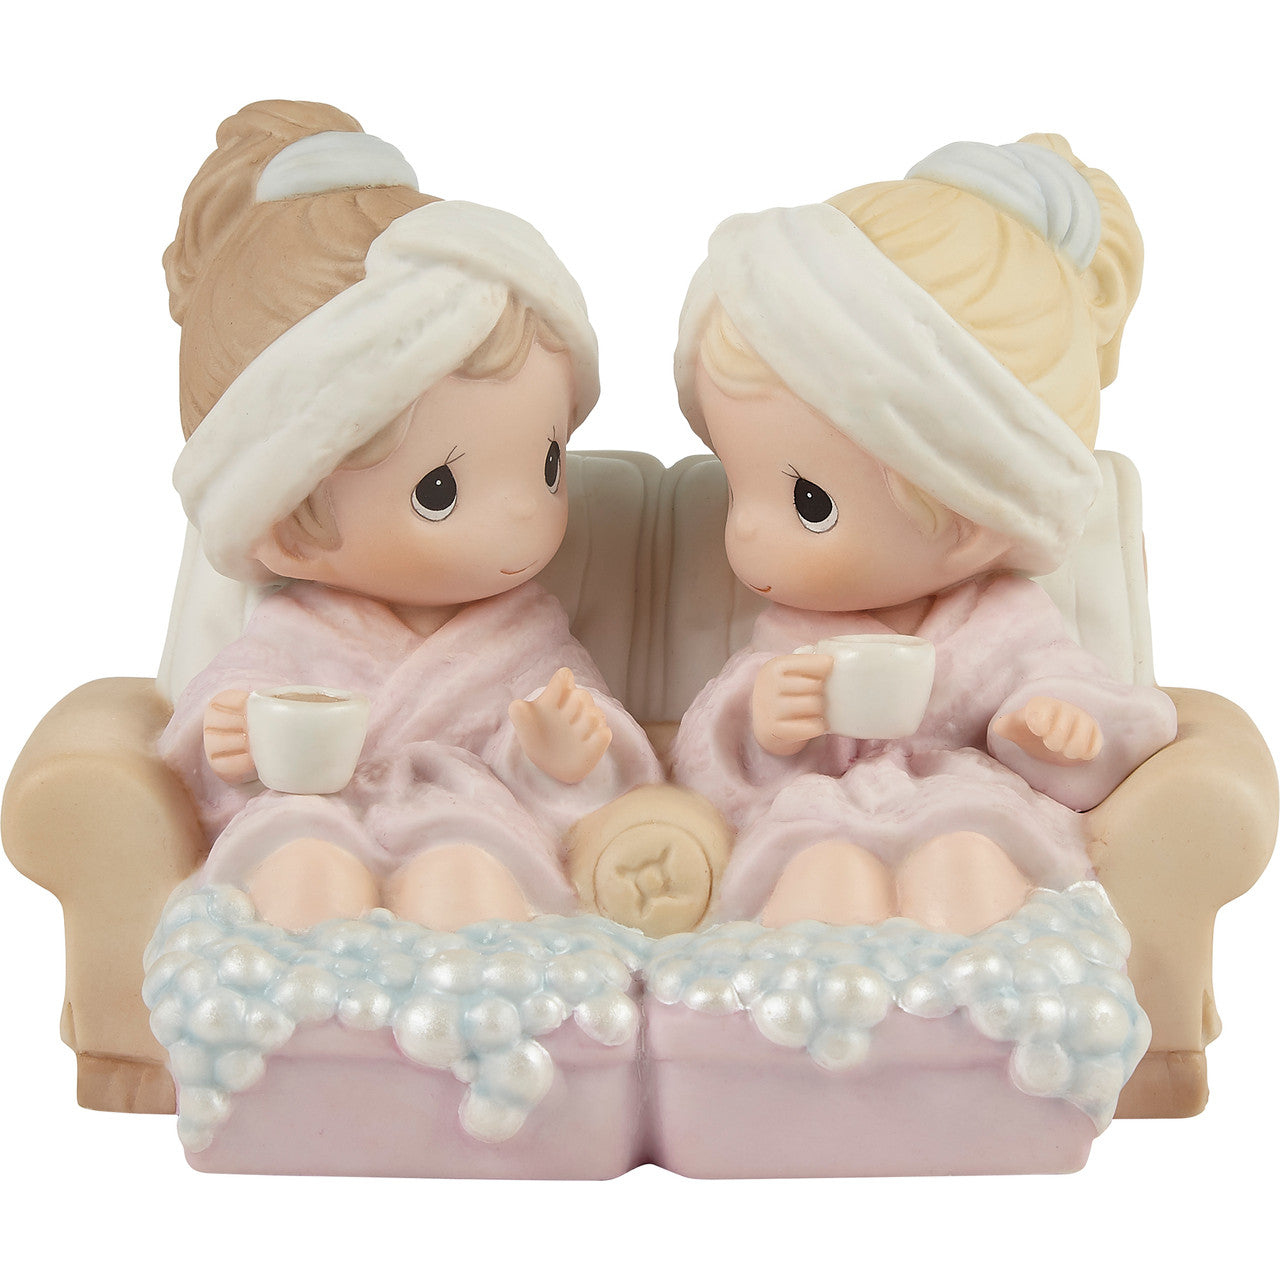 Precious Moments - A sweet friendship refreshes the soul - Two Girls Sharing Spa Figurine - Royal Gift